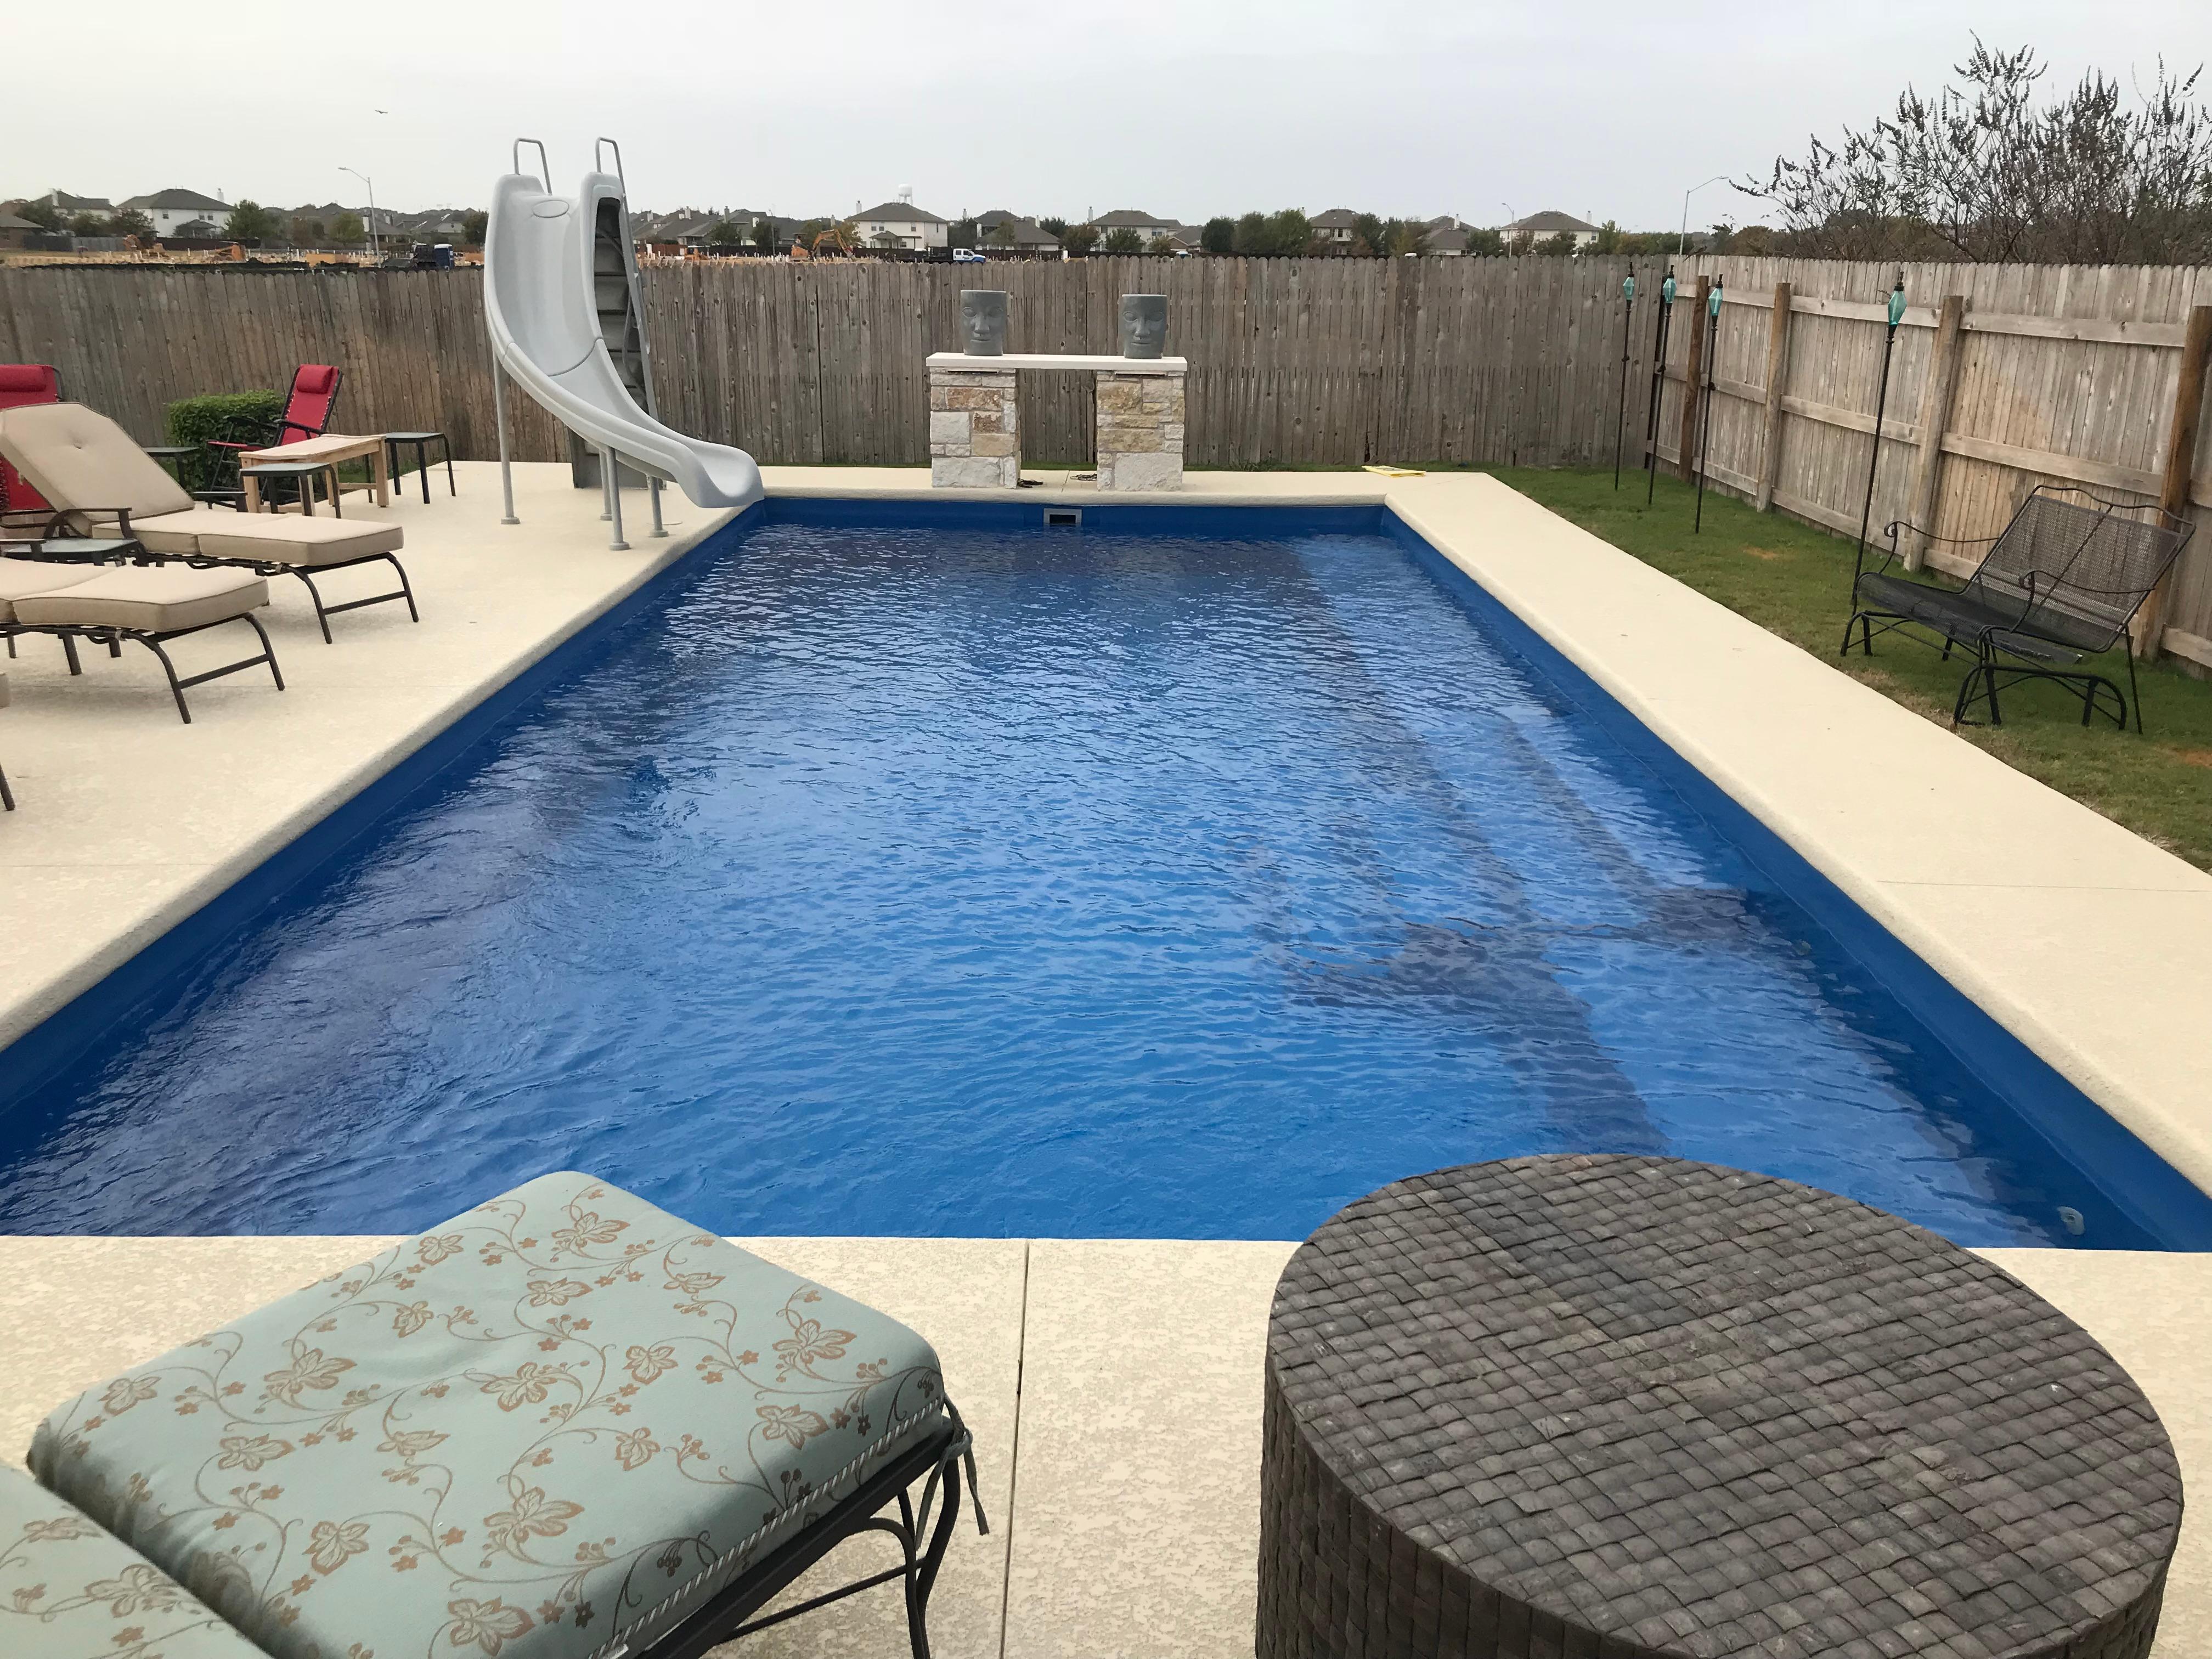 Contact our pool experts today for an estimate on in-ground fiberglass pools! Poolwerx Cedar Park Cedar Park (512)259-7665